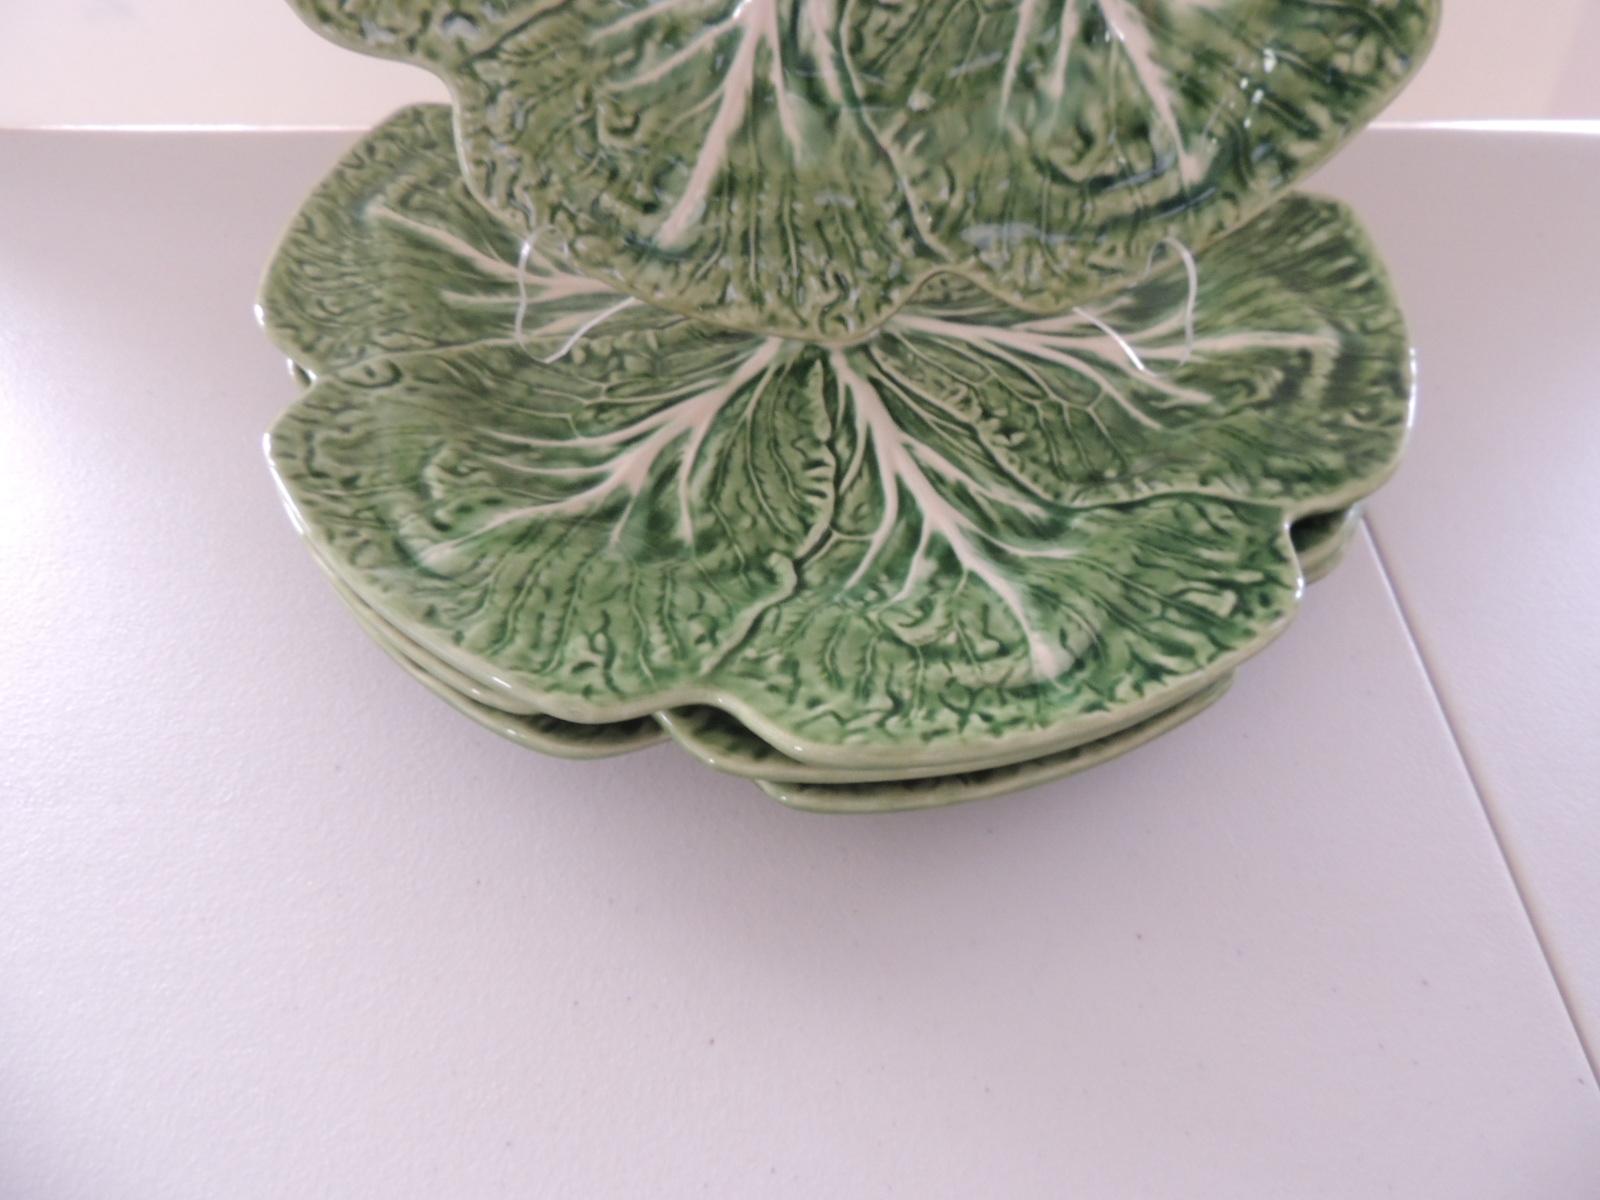 Set of '4' round large green cabbage dinner plates by Pinheiro
Size: 12